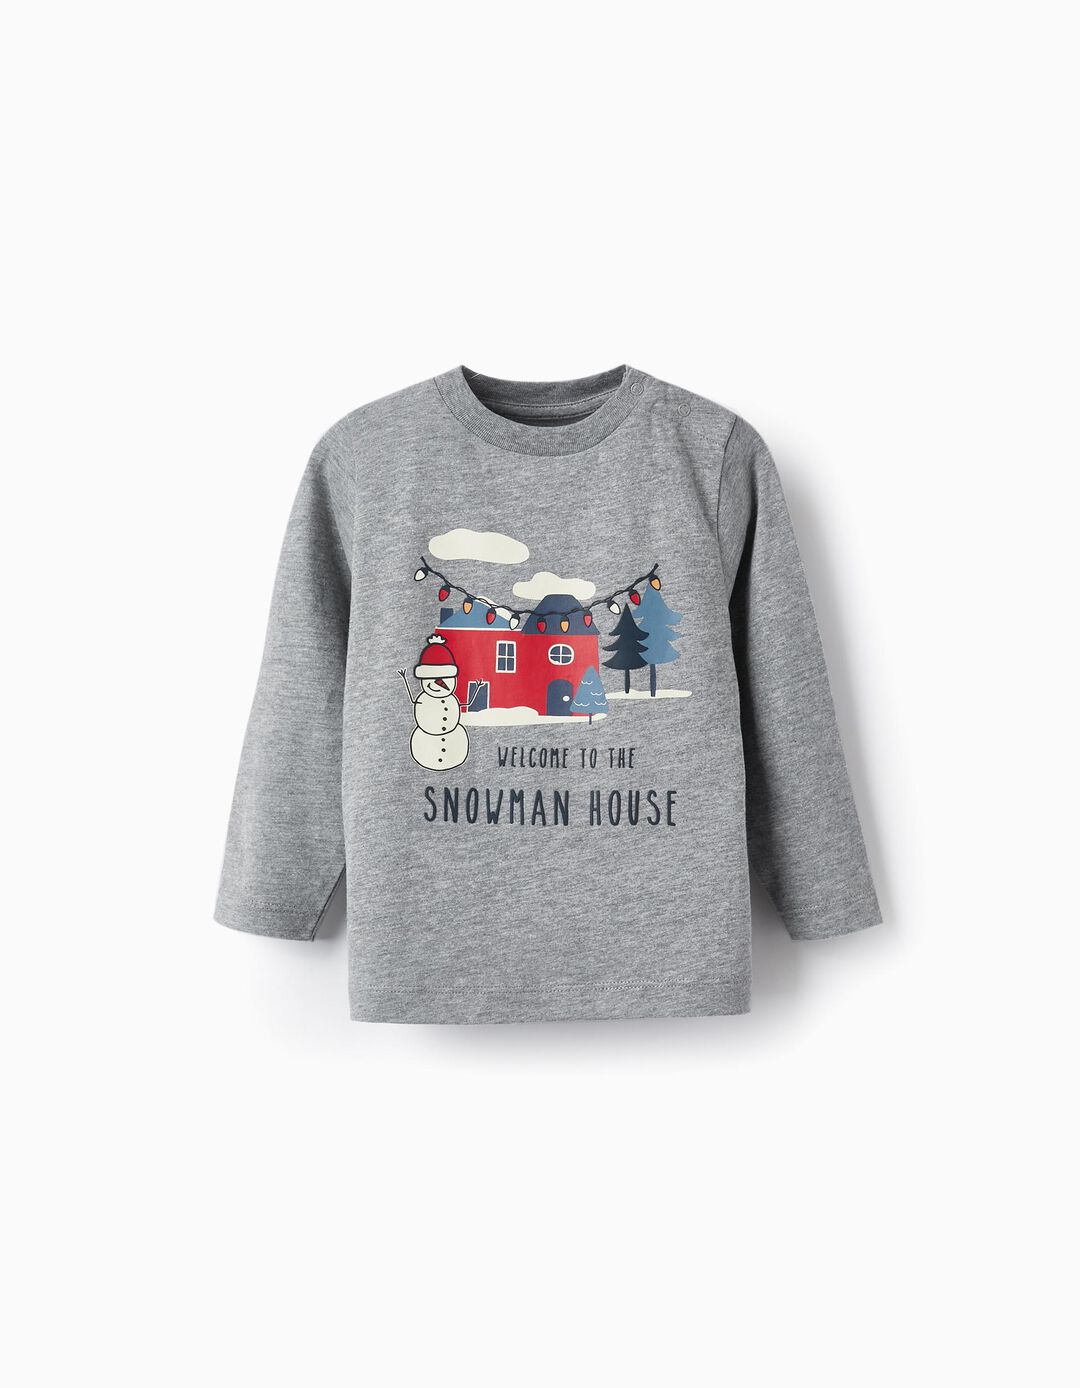 Cotton T-Shirt for Baby Boys 'Snowman House', Grey